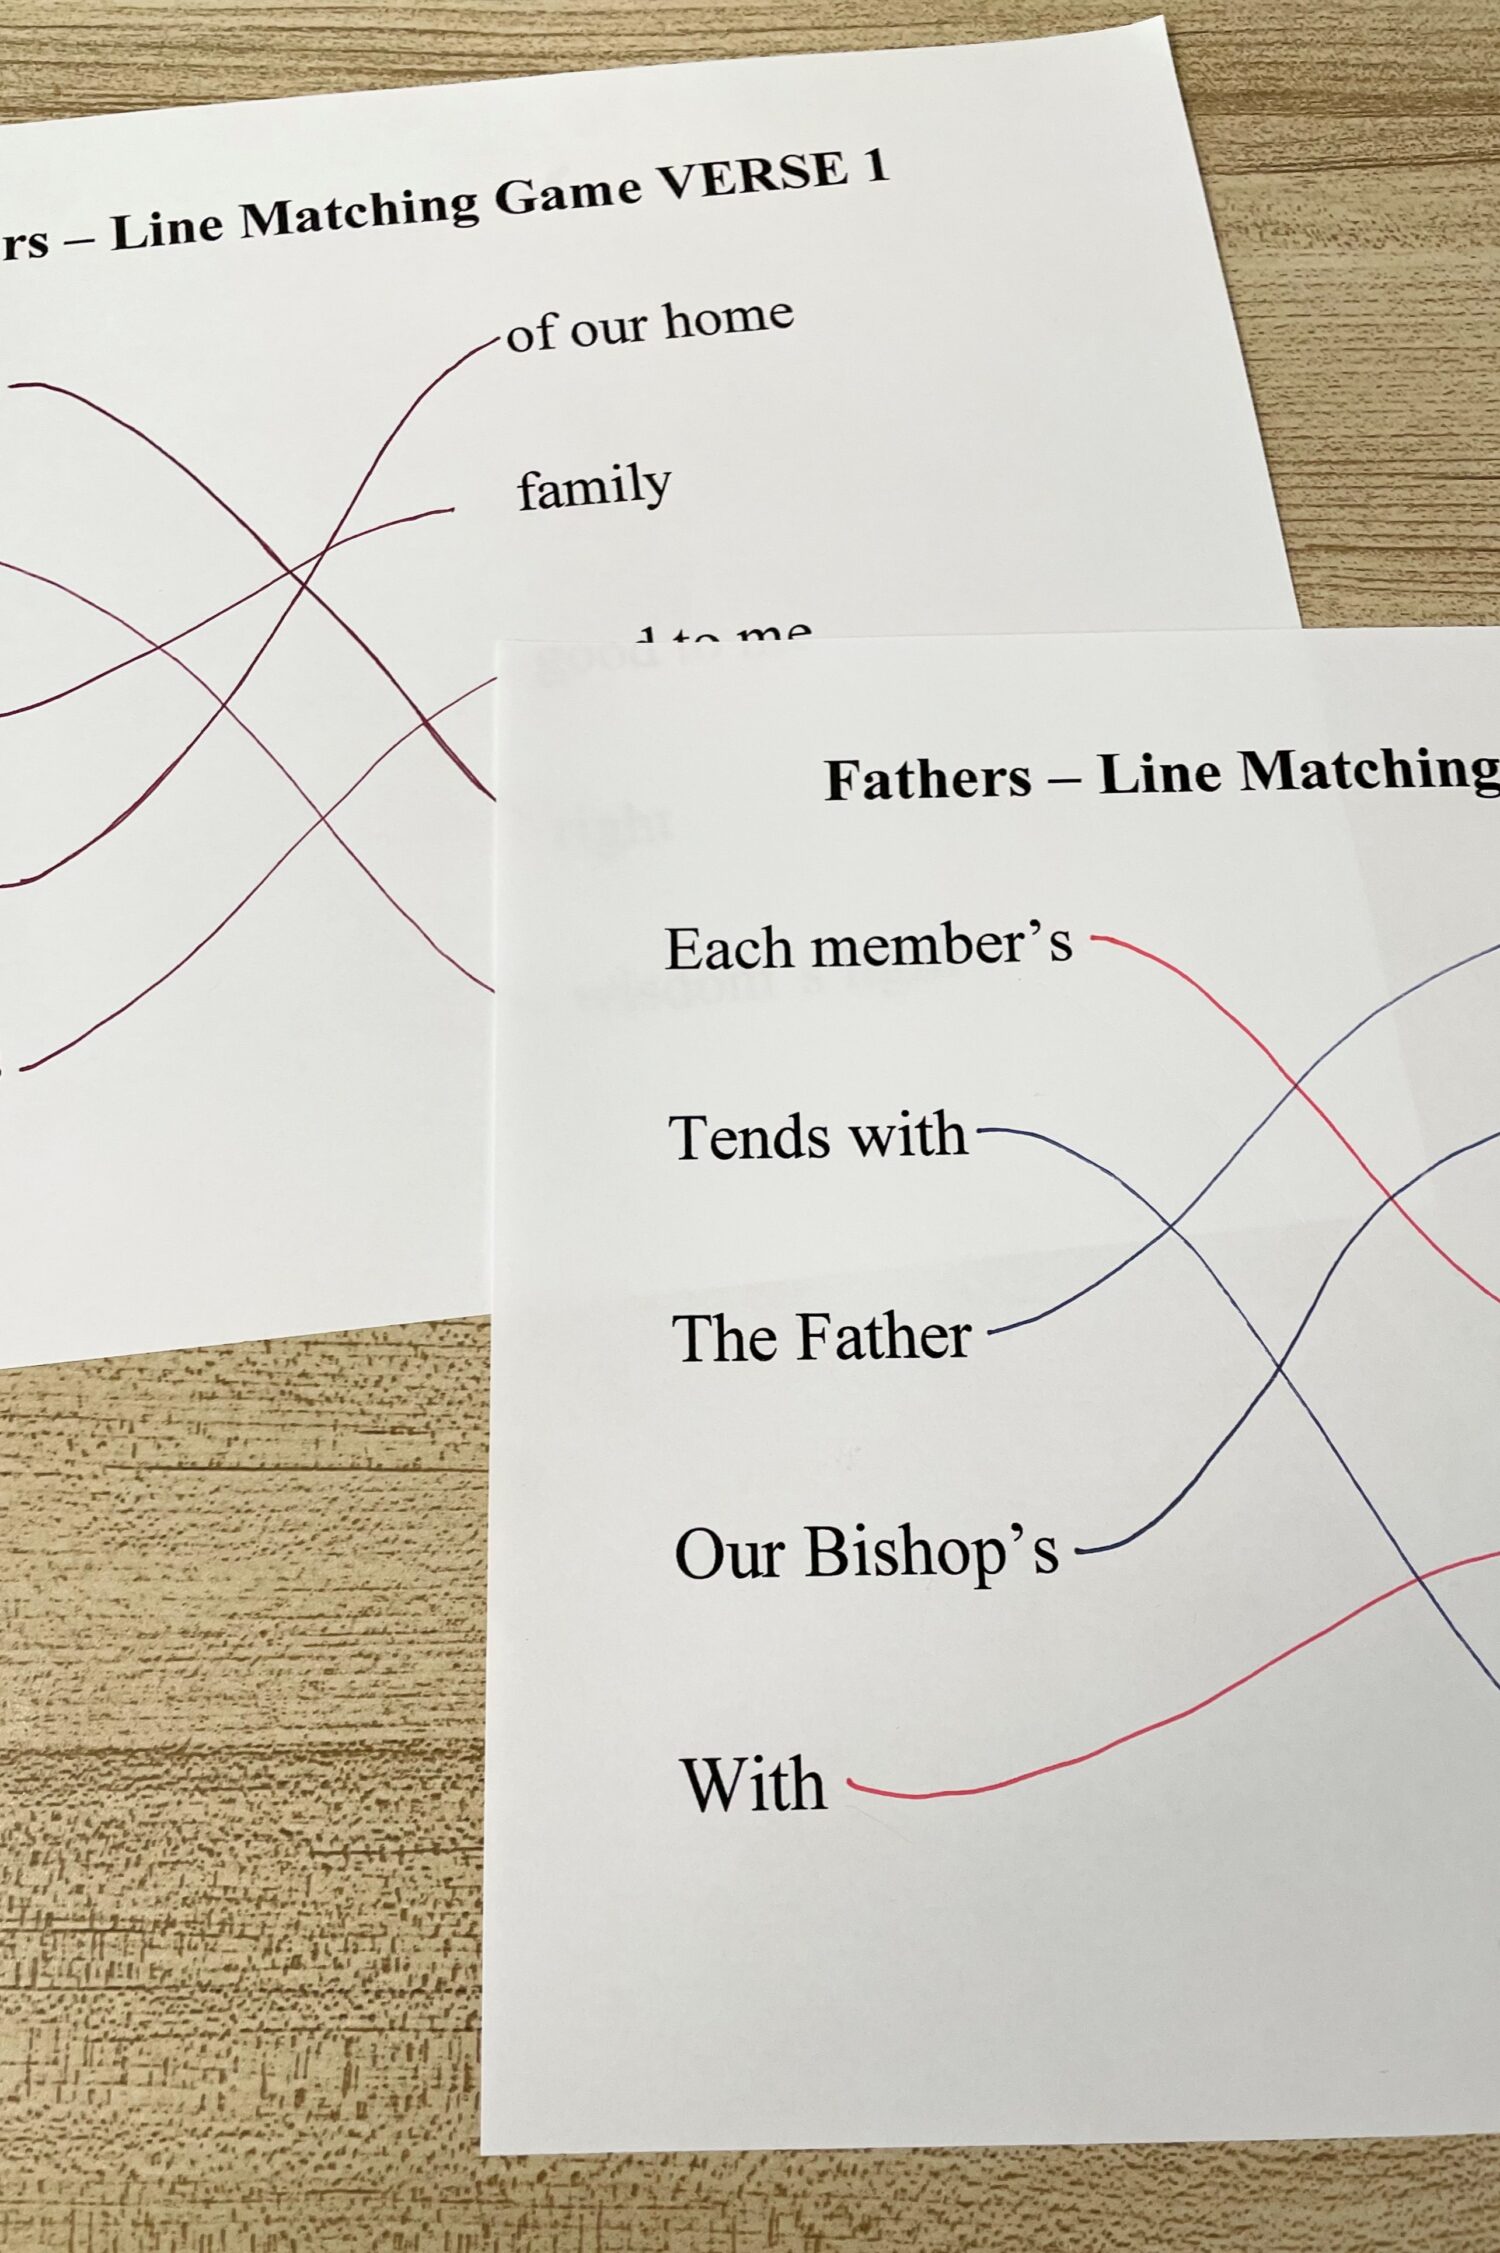 Fathers Line Matching Game Easy ideas for Music Leaders IMG 6611 1